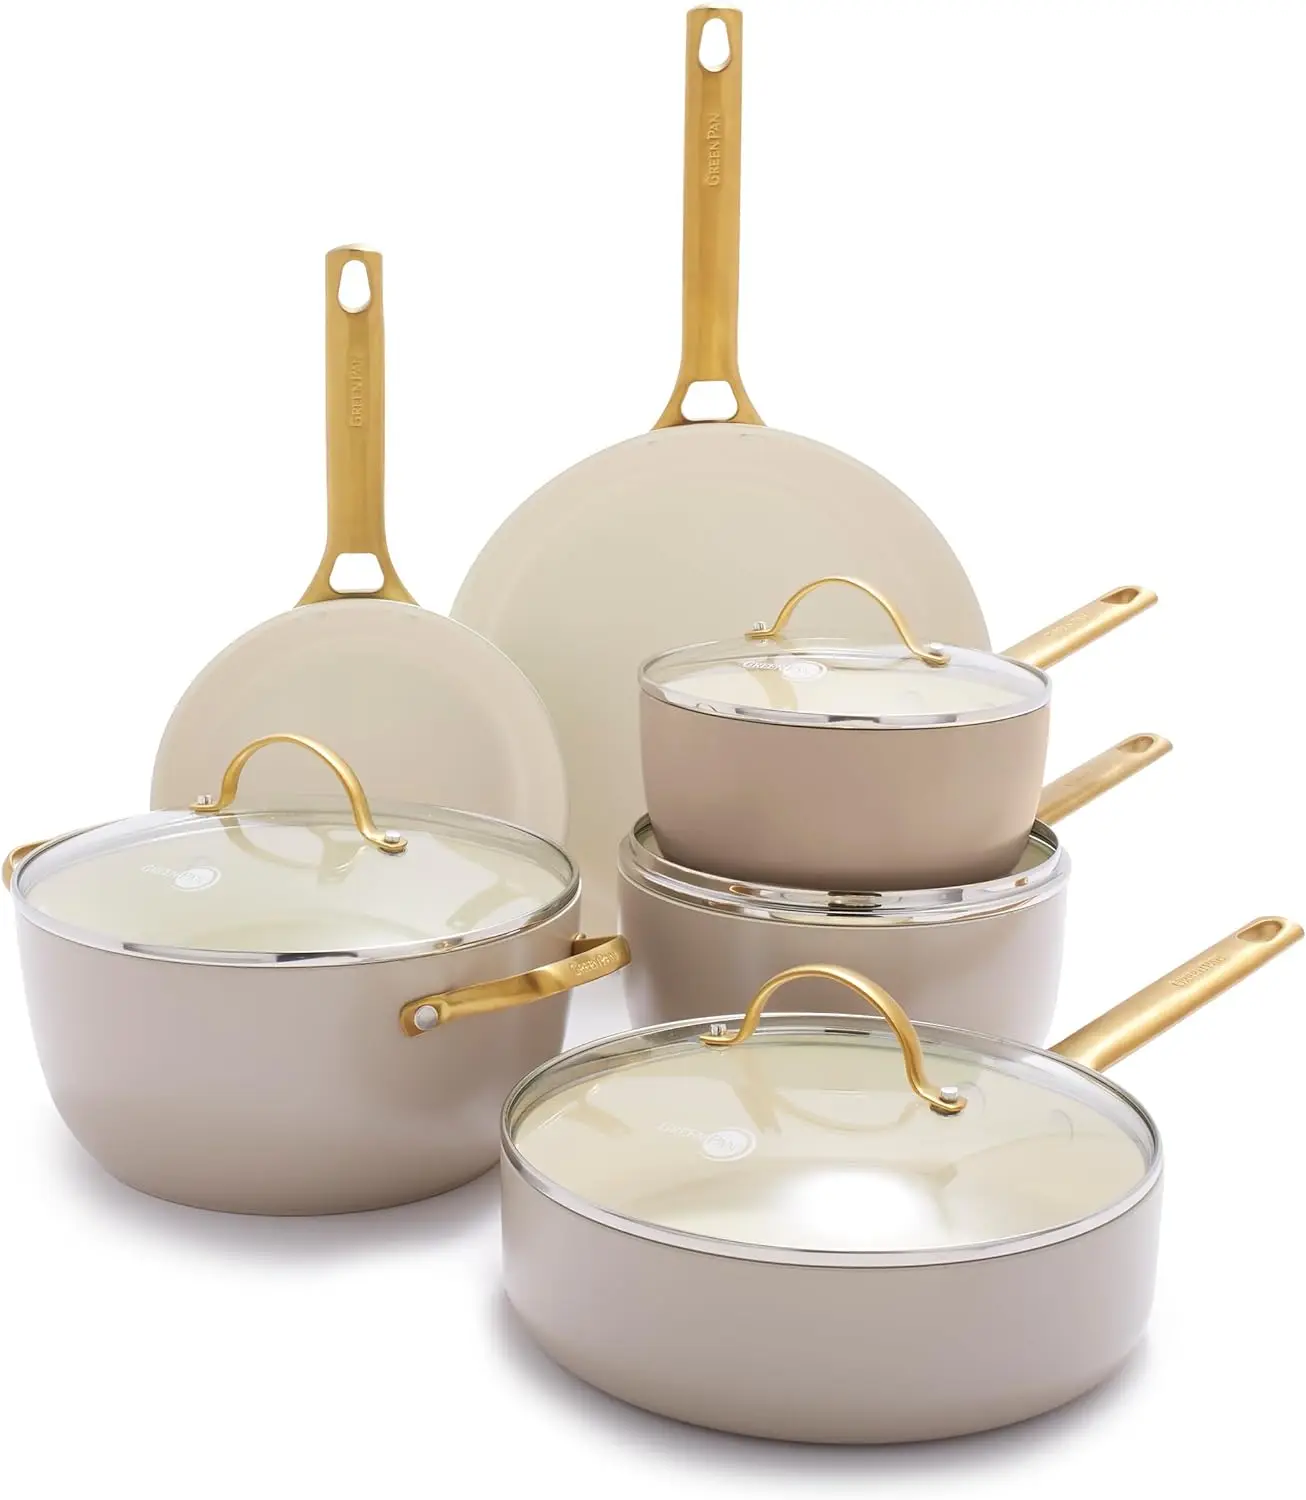 

Hard Anodized Healthy Ceramic Nonstick 10 Piece Cookware Pots and Pans Set,Gold Handle,PFAS-Free,Dishwasher Safe, Oven Safe